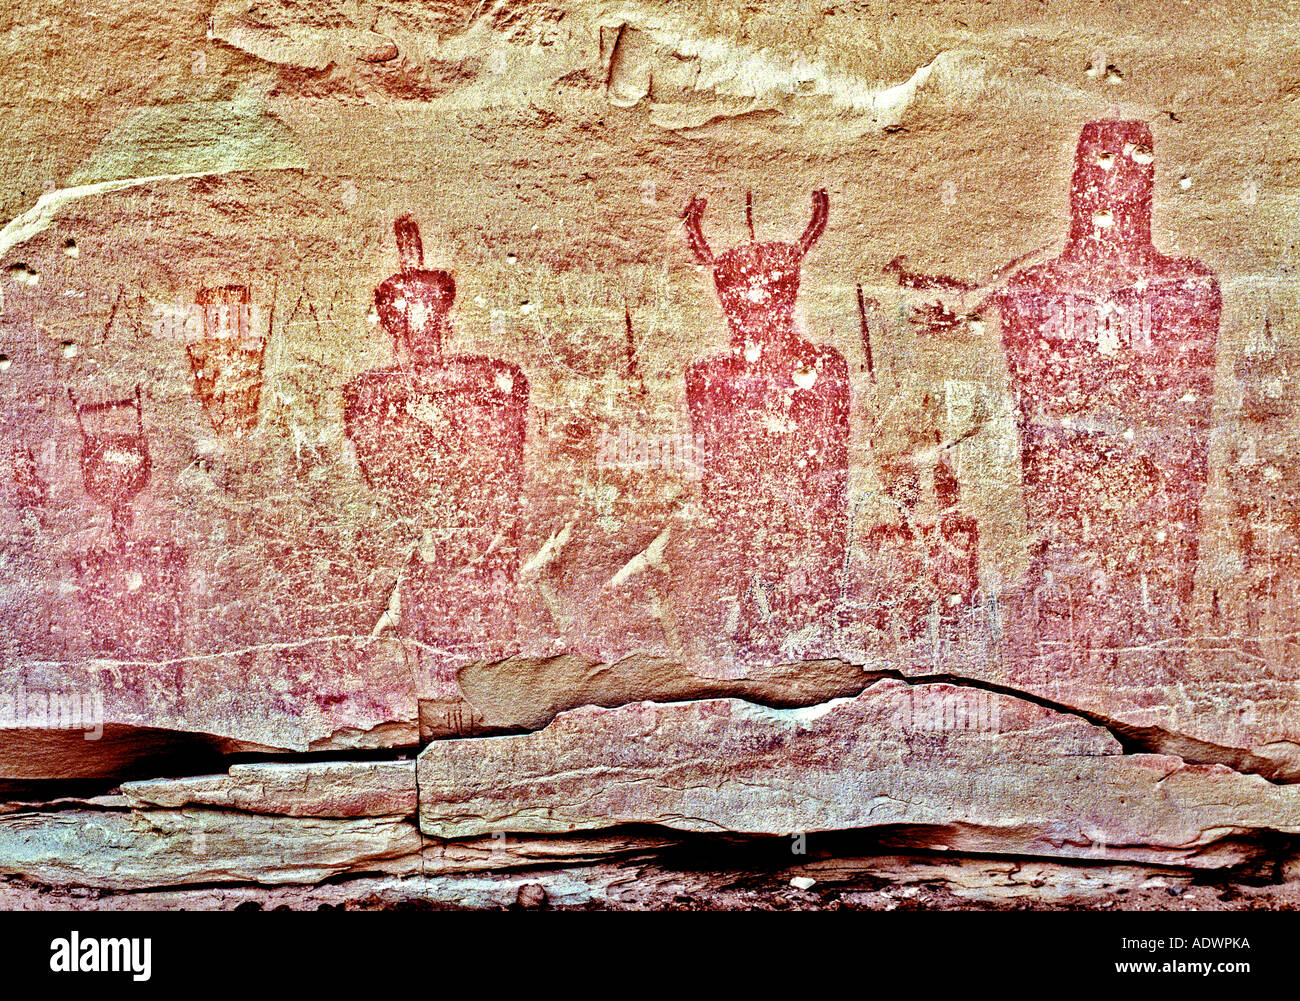 Ute pictographs with bullet holes Utha Stock Photo